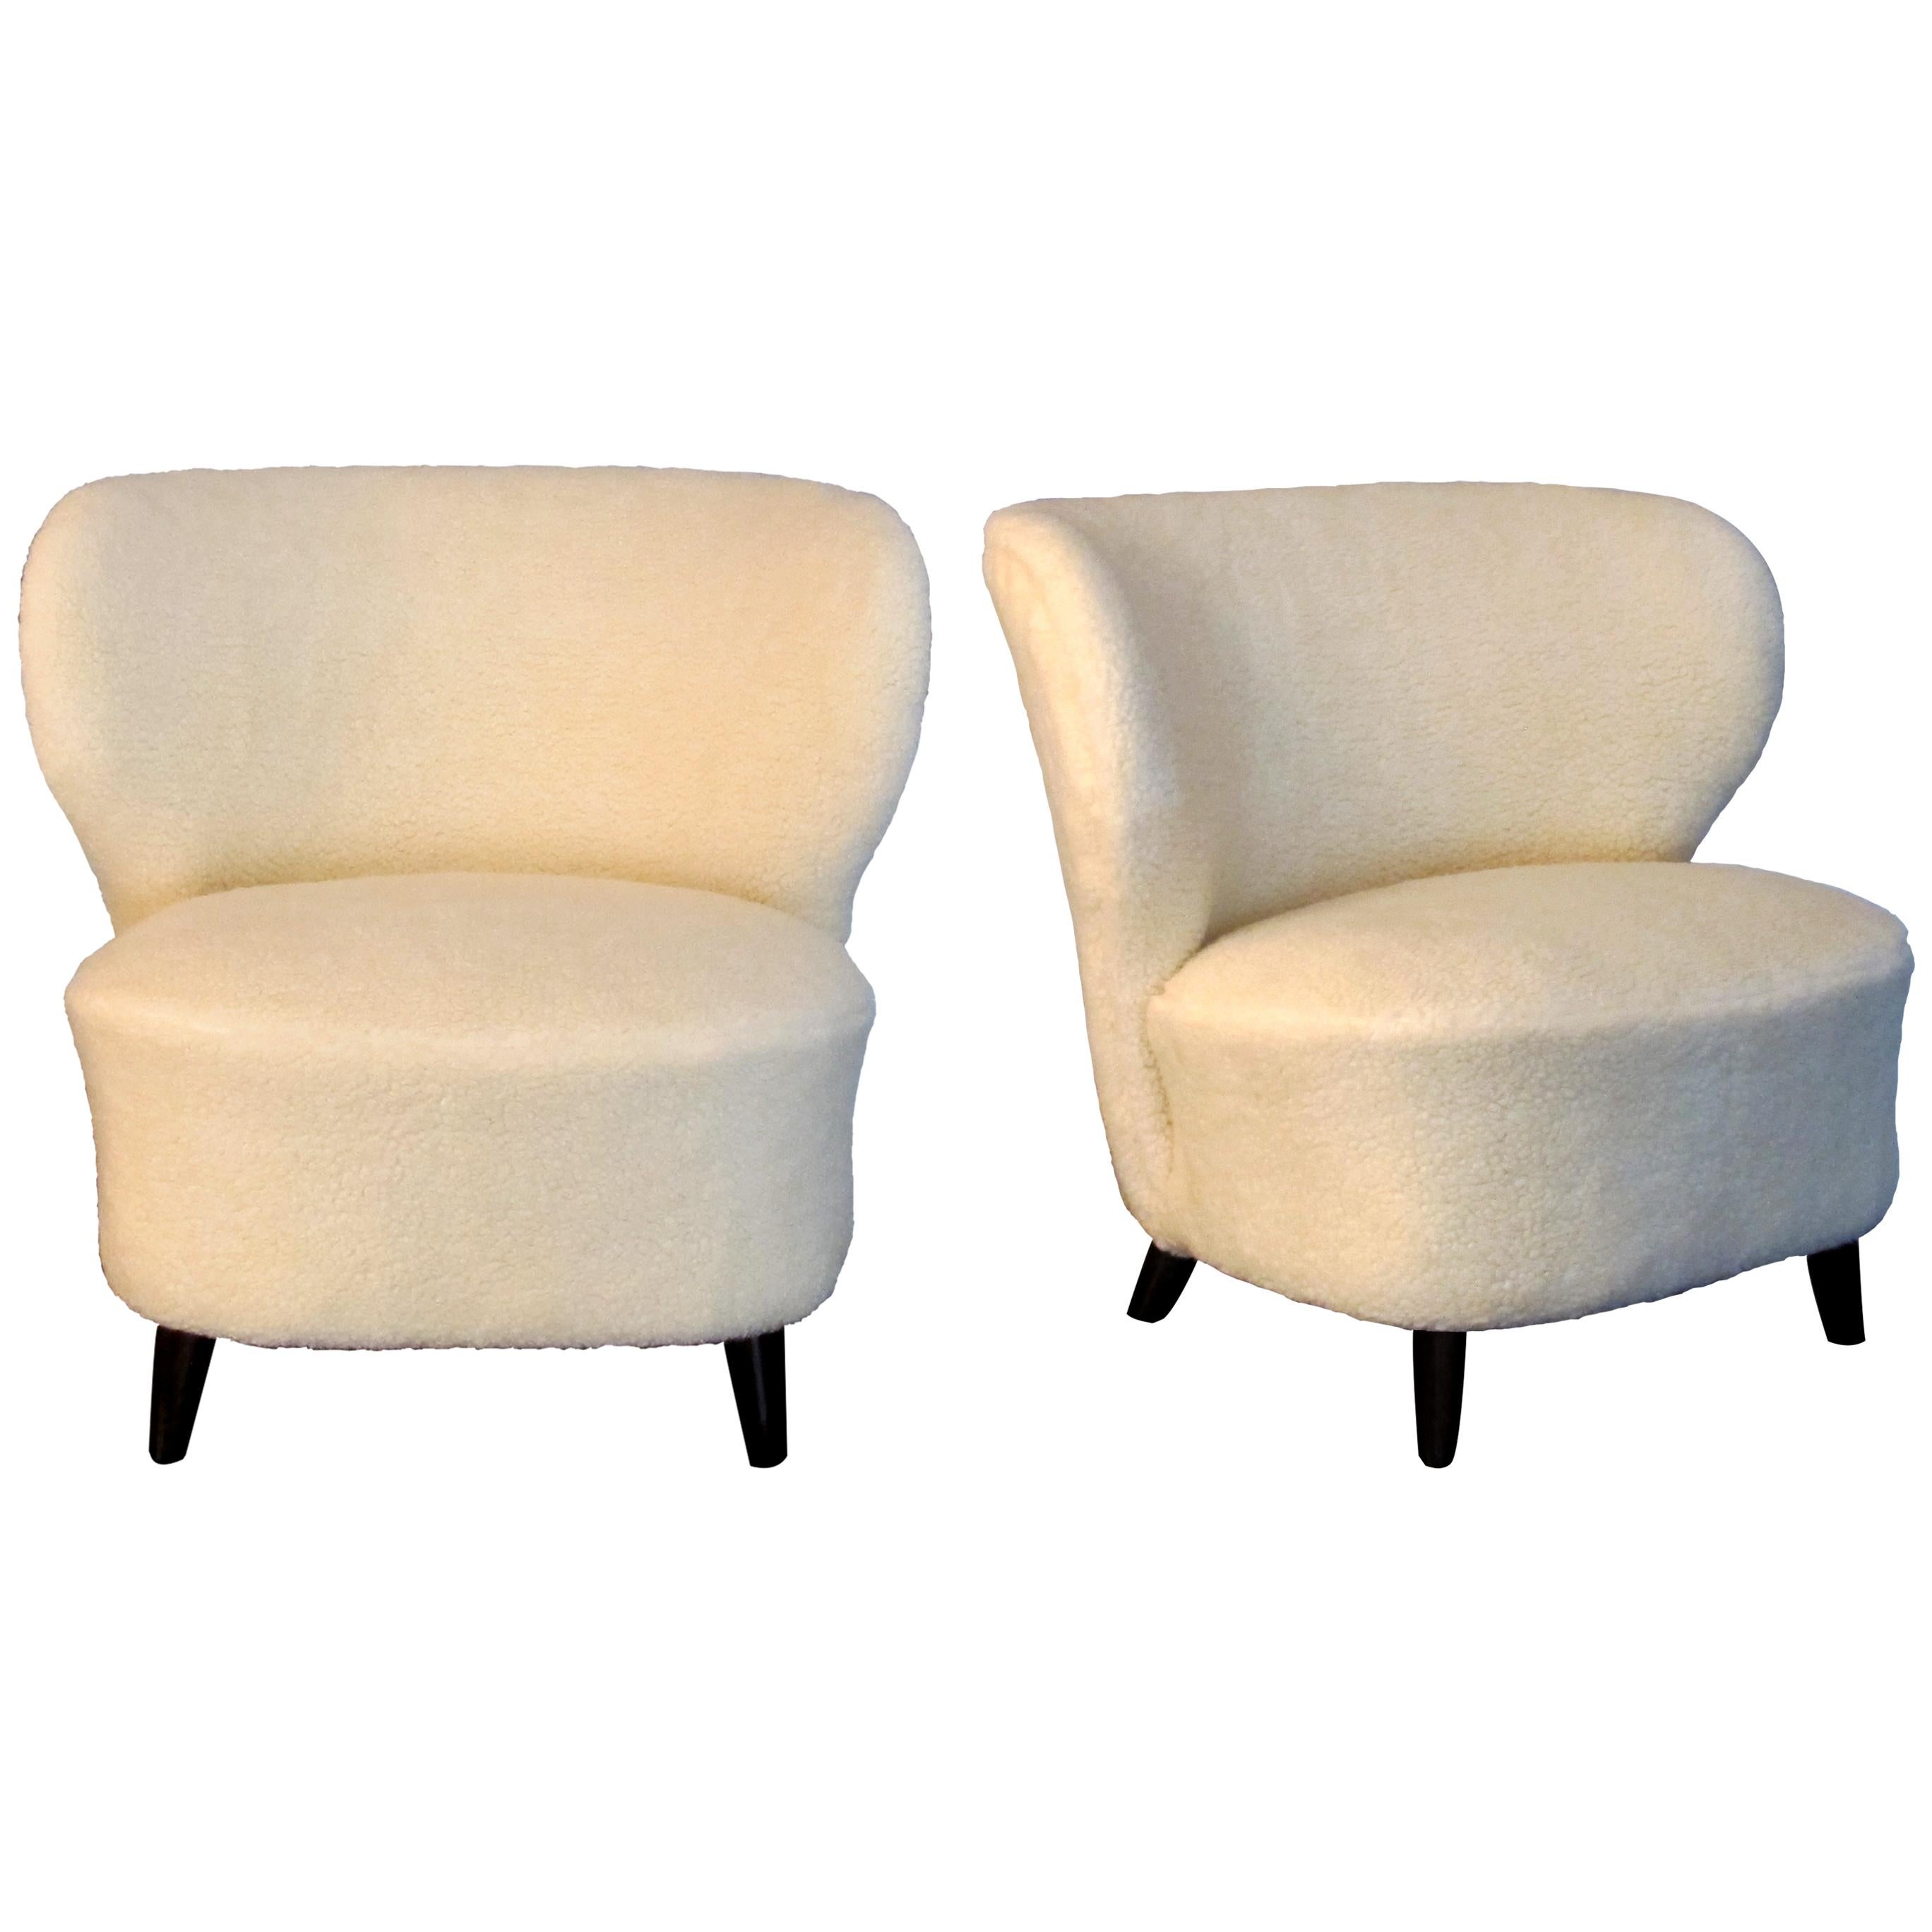 Other Pair of 1940s Finnish Curved Wingback Lounge Armchairs in Soft Lambskin Fabric